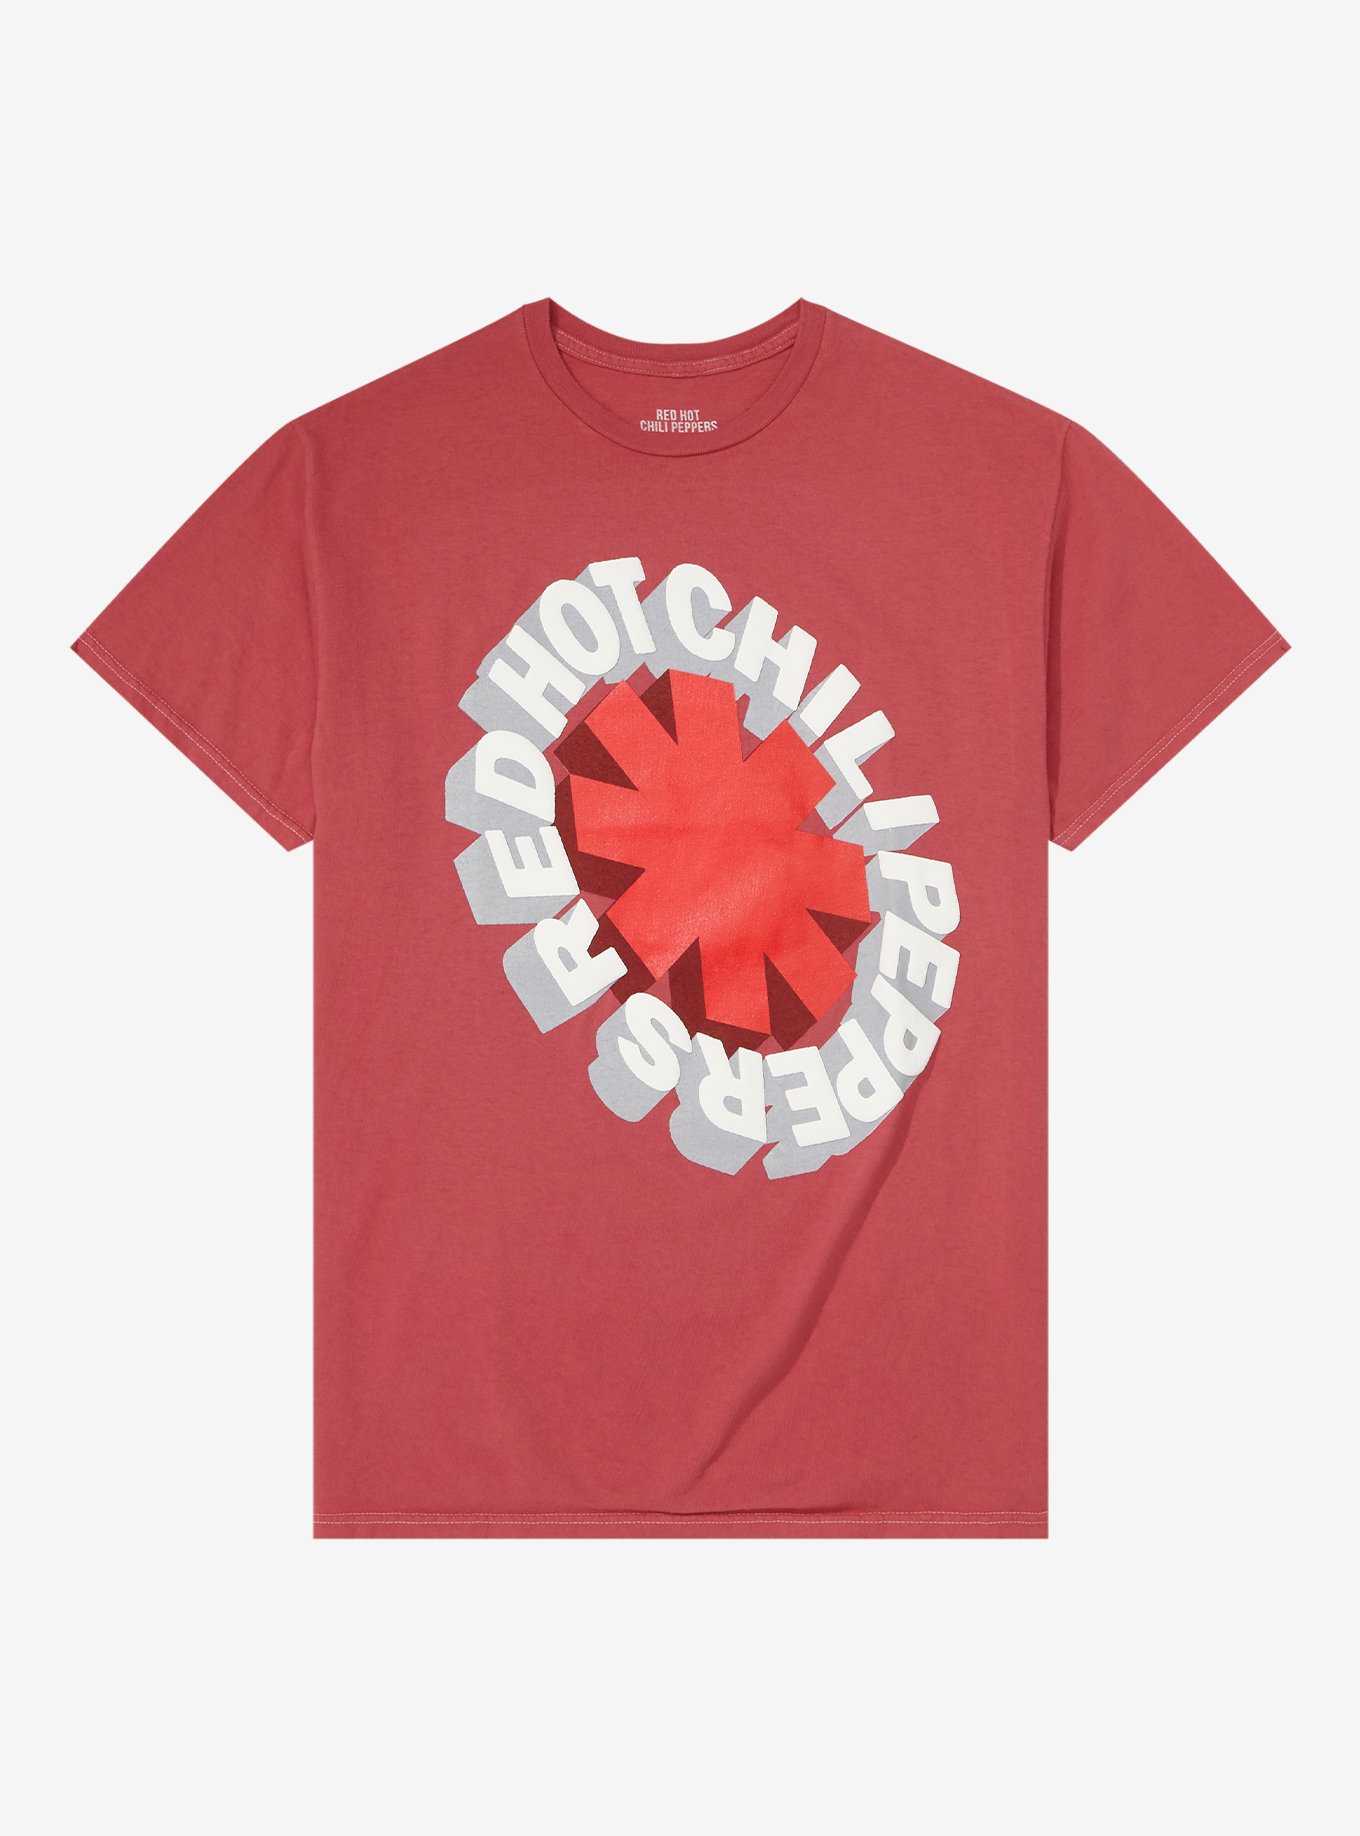 OFFICIAL Red Hot Chili Peppers T-Shirts & Merch | Hot Topic